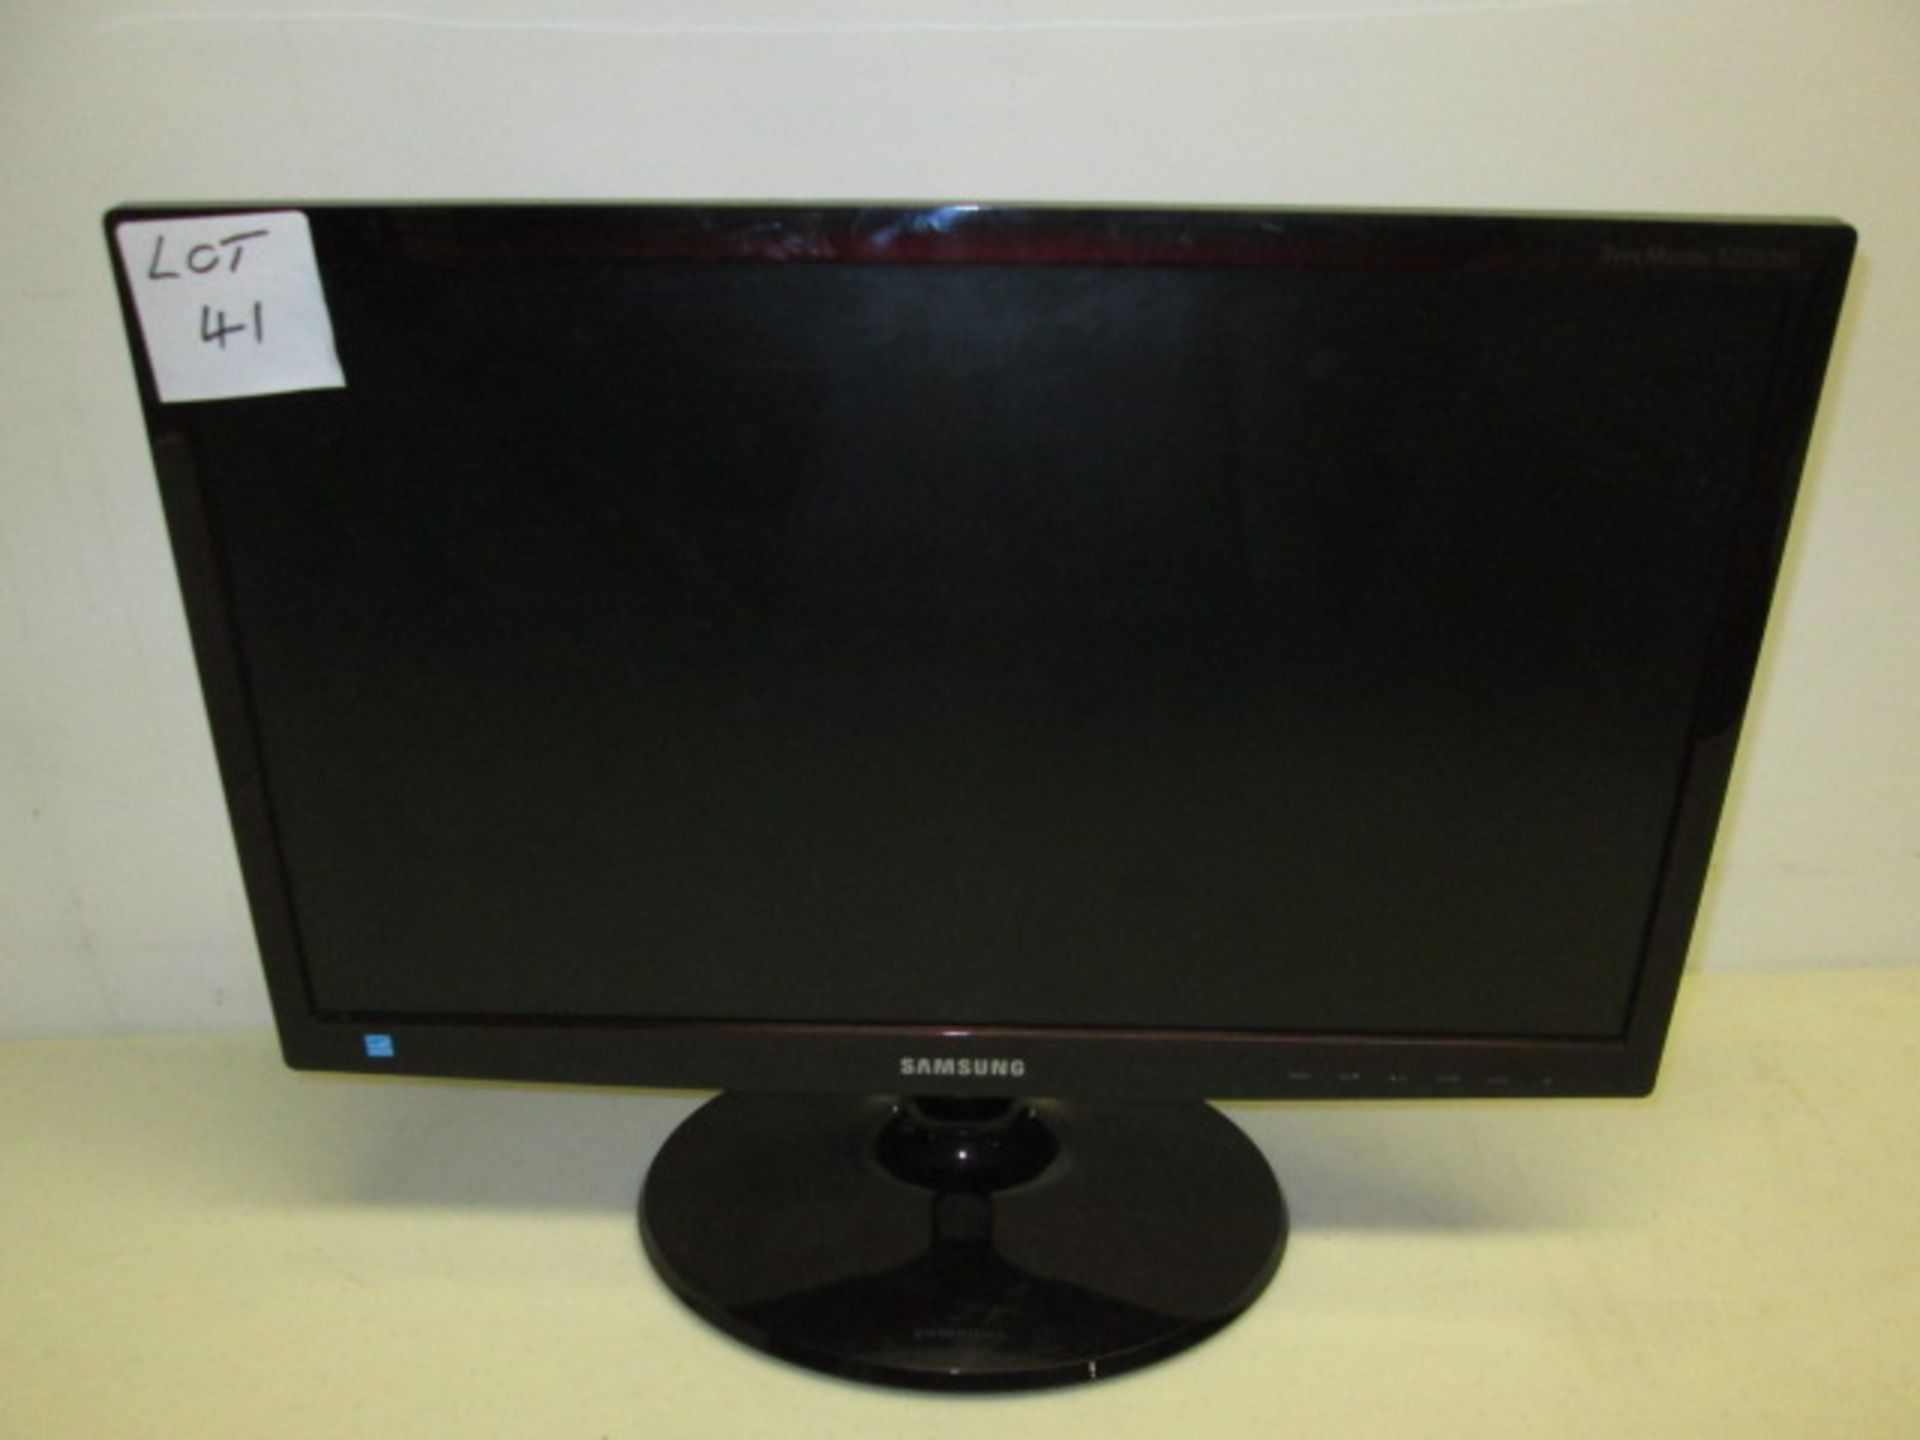 Samsung Synmaster S22B350 Full HD, LED LCD 21.5" Widescreen Monitor. HDMI Compatible.